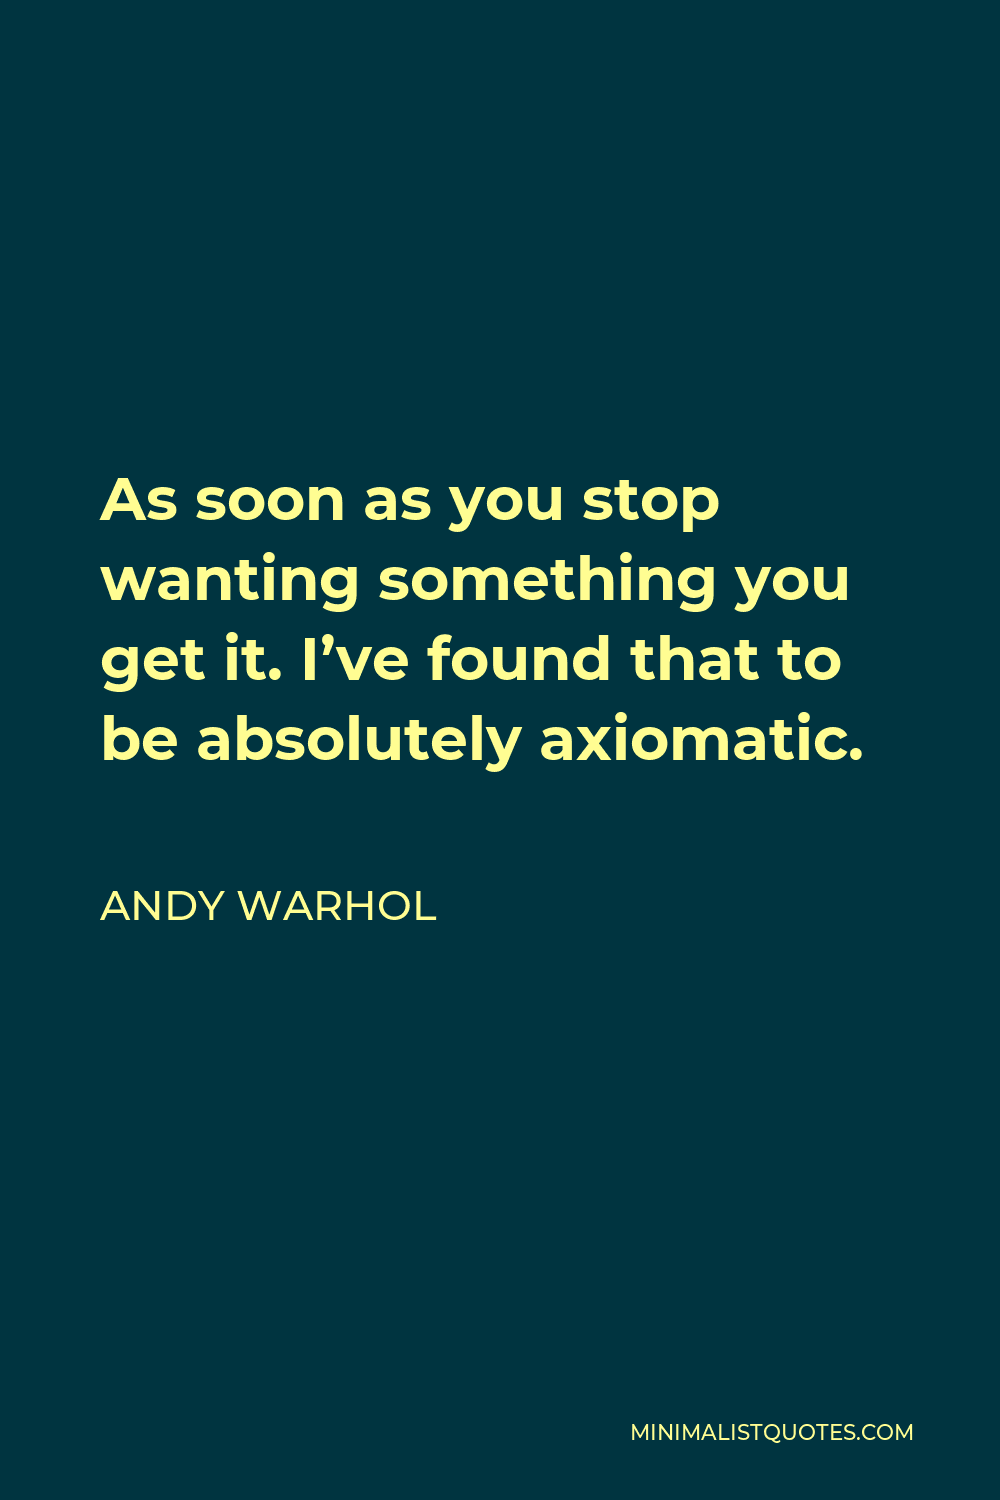 Andy Warhol Quote - As soon as you stop wanting something you get it. I’ve found that to be absolutely axiomatic.